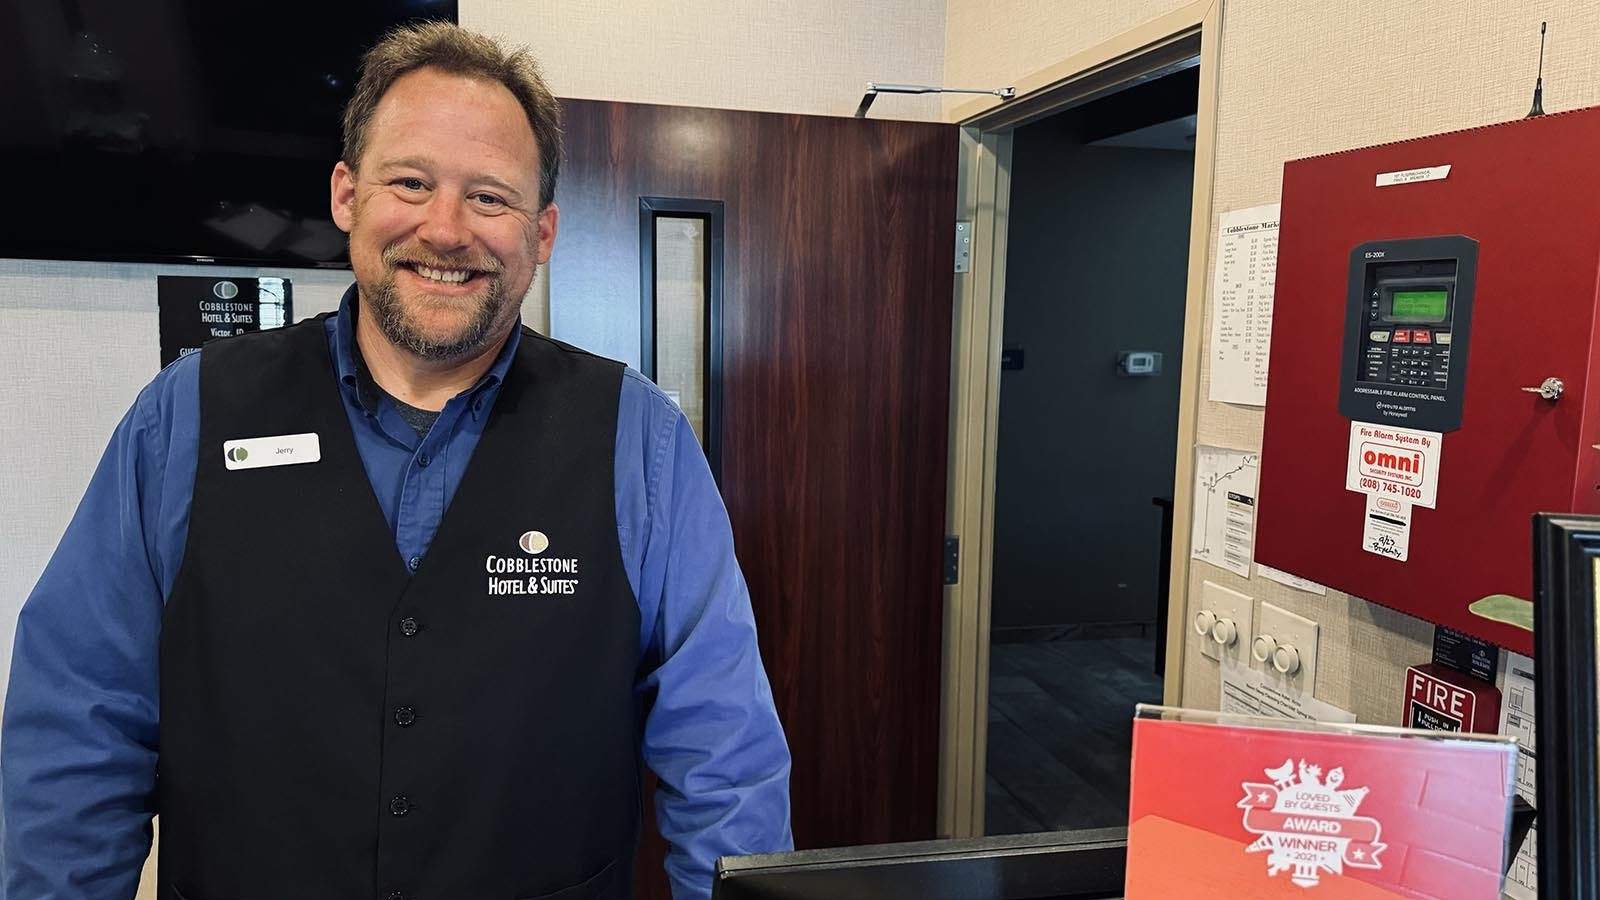 Jerry Anderson, the front desk clerk of Cobblestone Hotel & Suites in Victor, Idaho, plans a trip Friday to check out Reclamation Road, a secret route from the Idaho’s Teton Valley to Jackson, Wyoming.